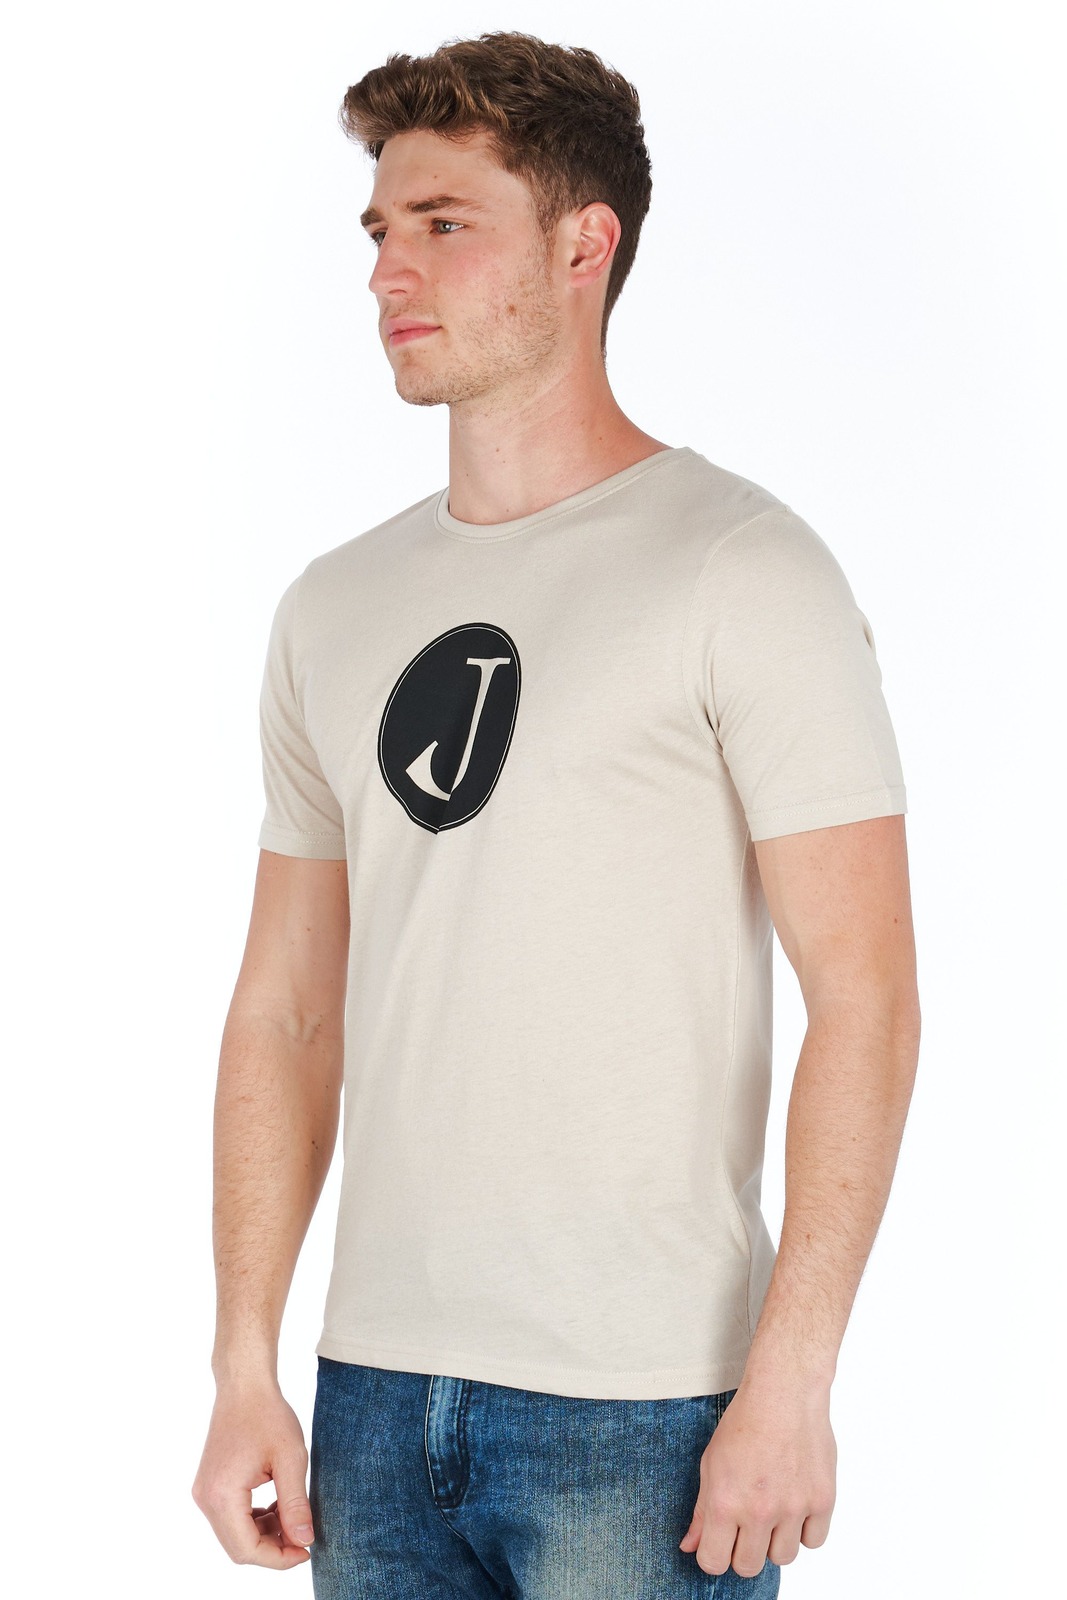 Jeckerson Grey T-shirts for Men - POINT